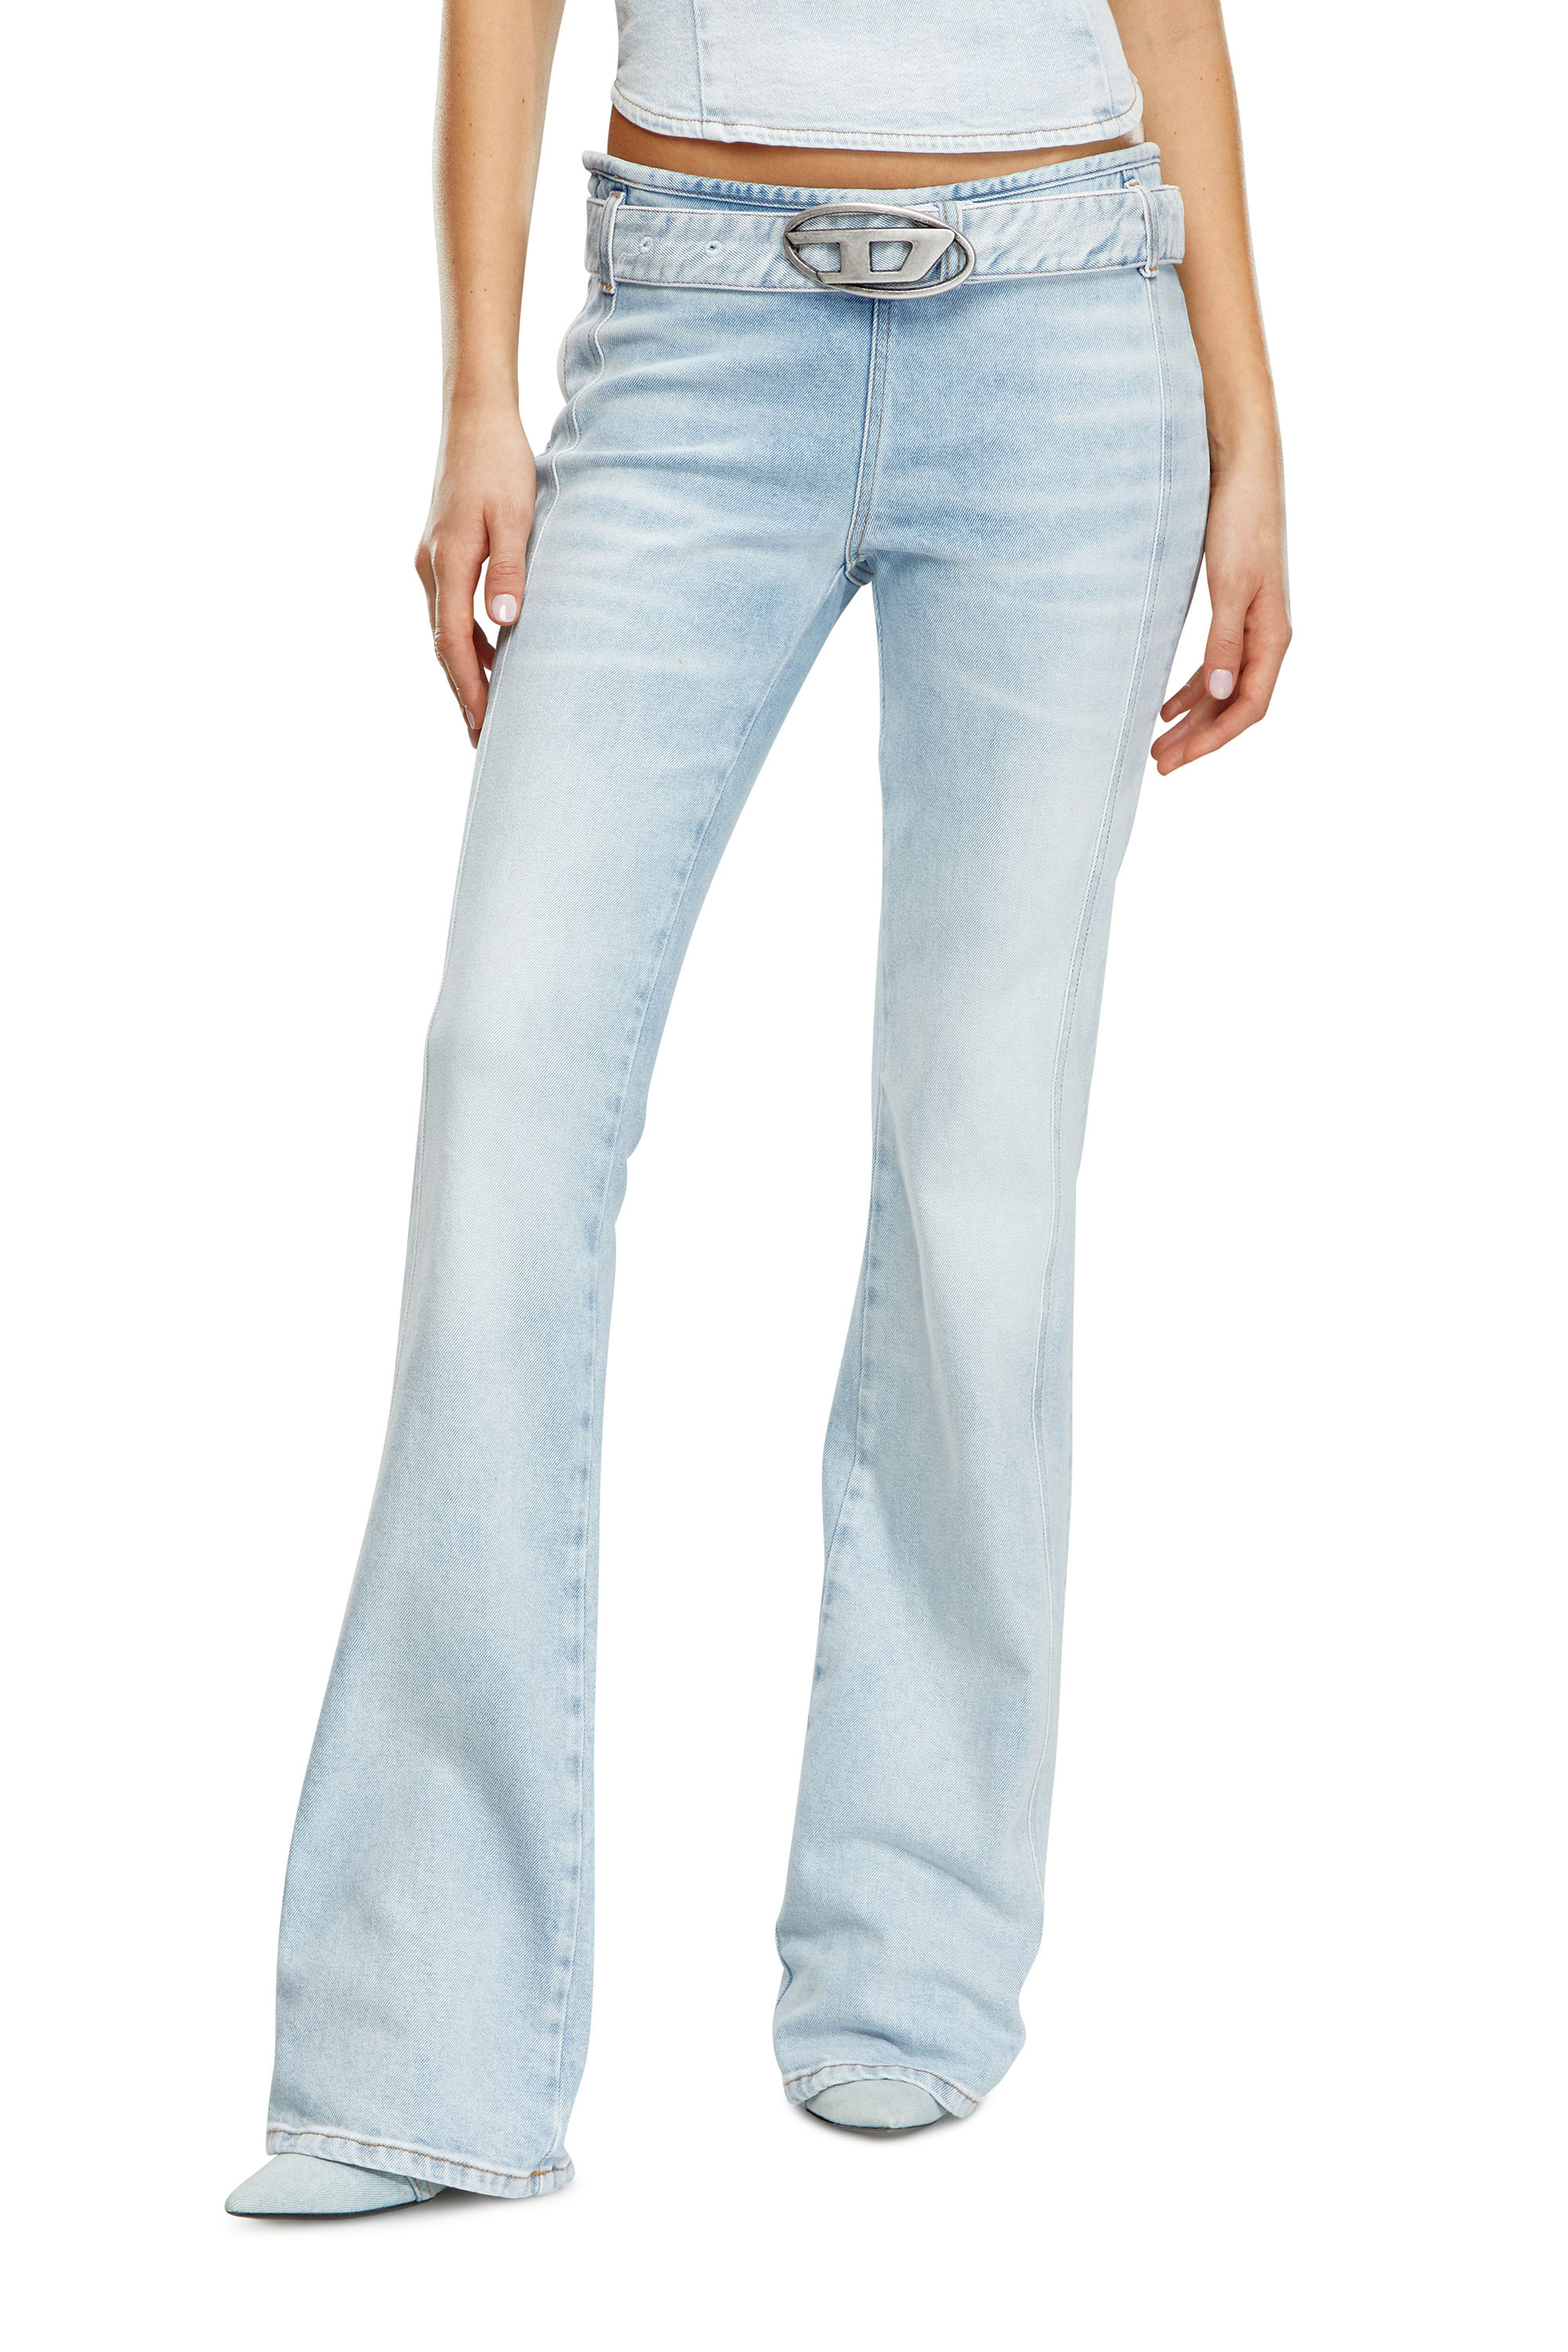 Diesel - Bootcut and Flare Jeans D-Ebbybelt 0JGAA, Mujer Bootcut y Flare Jeans - D-Ebbybelt in Azul marino - Image 2